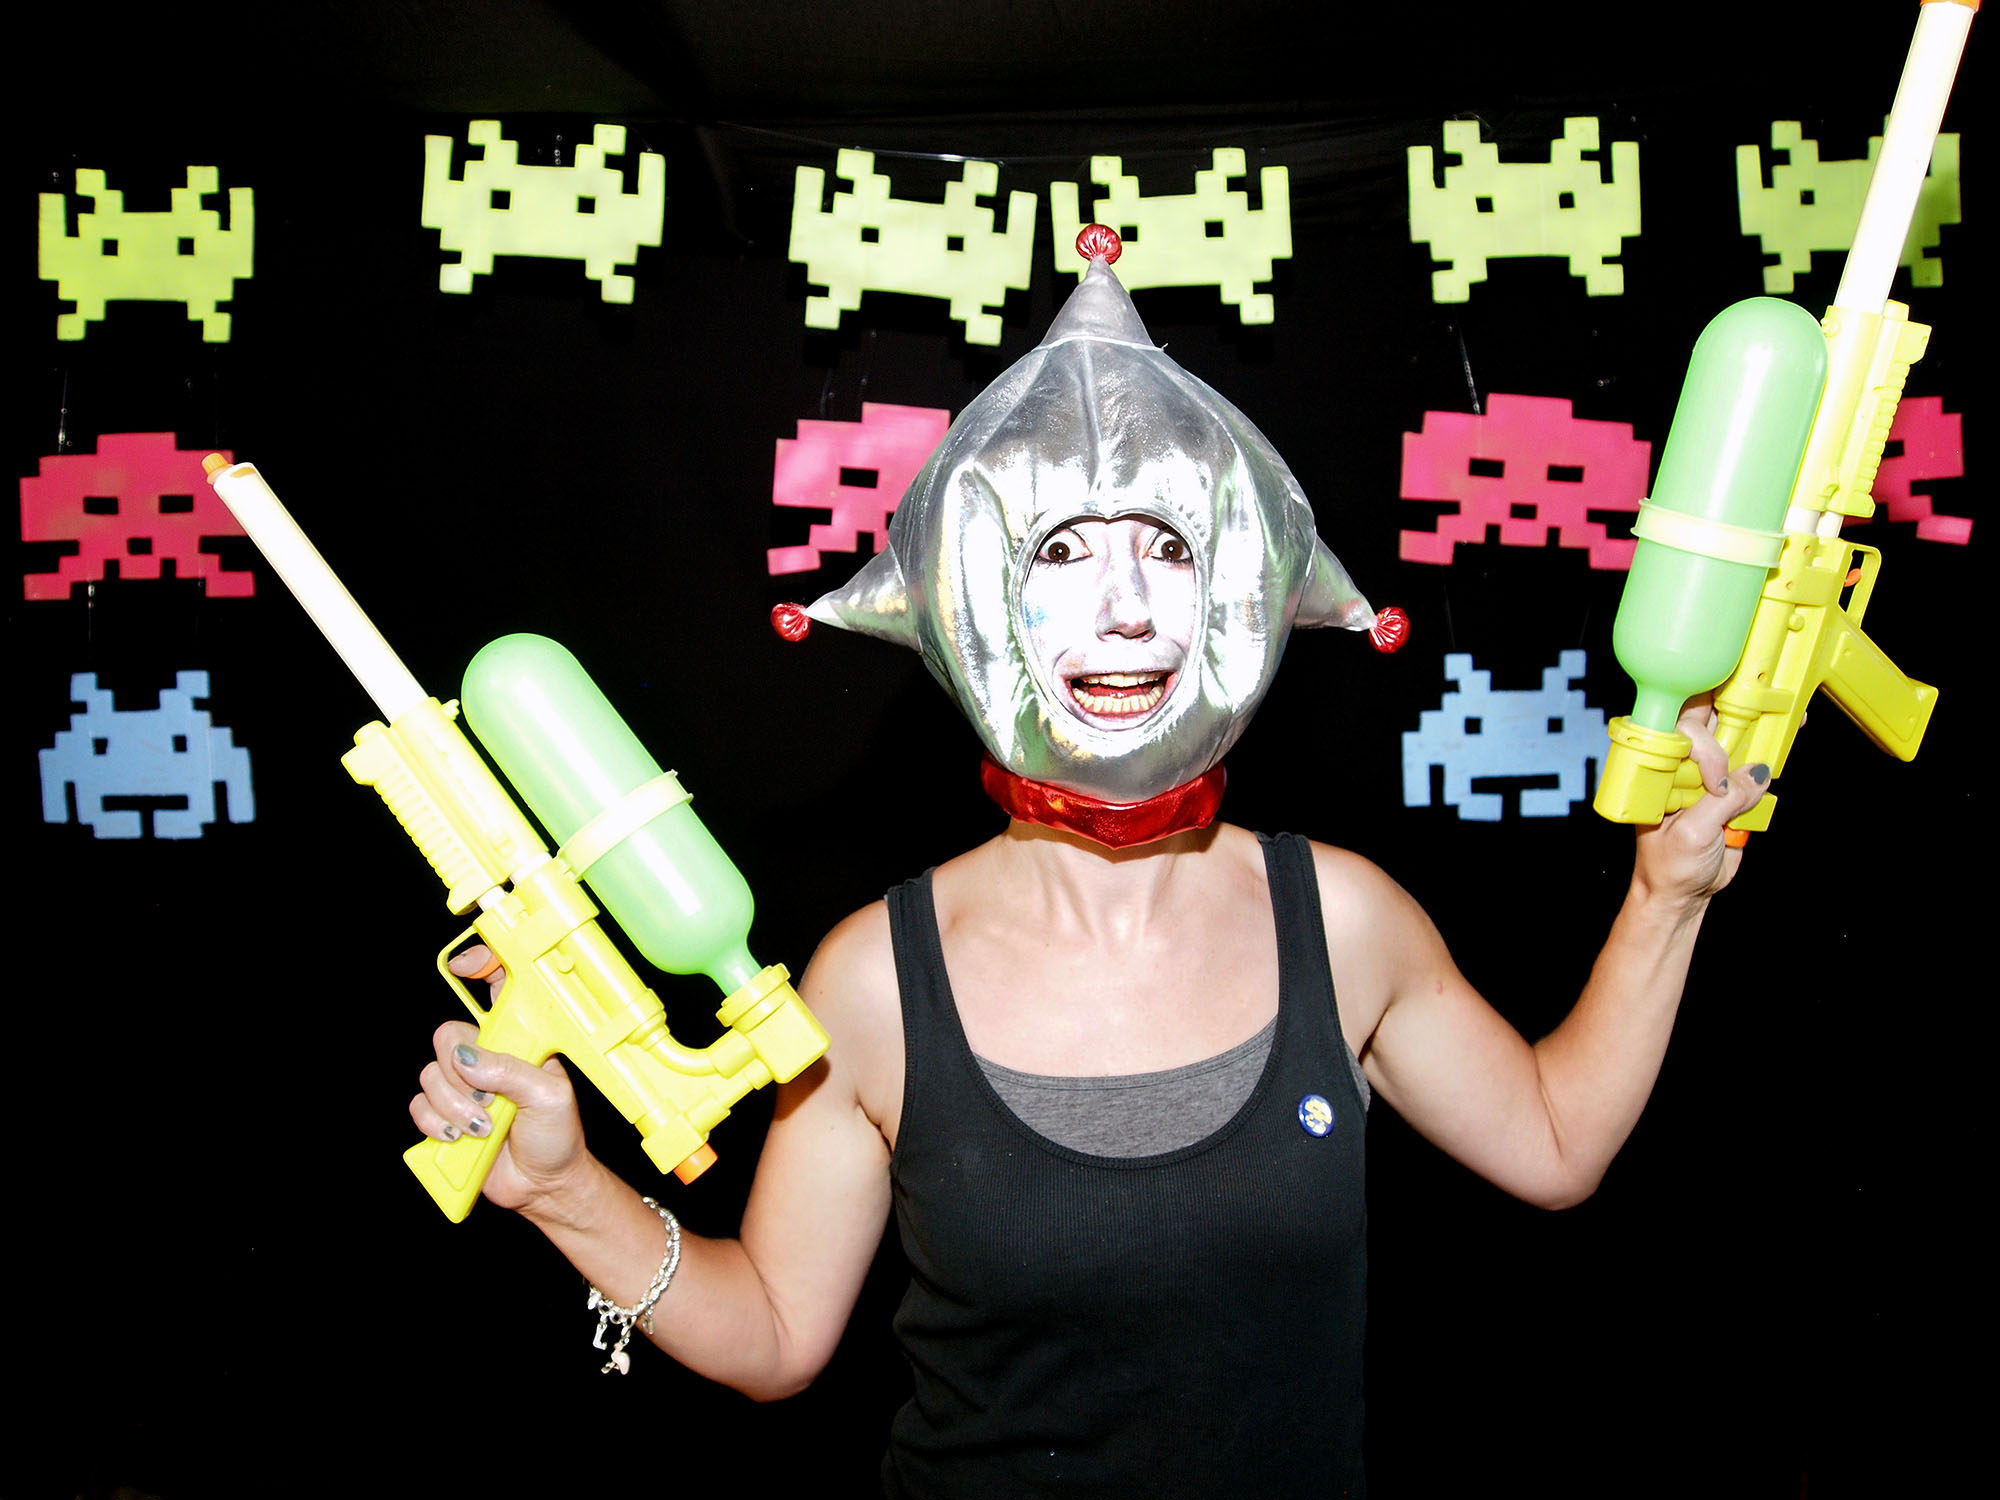 Space Invaders – Photobooth